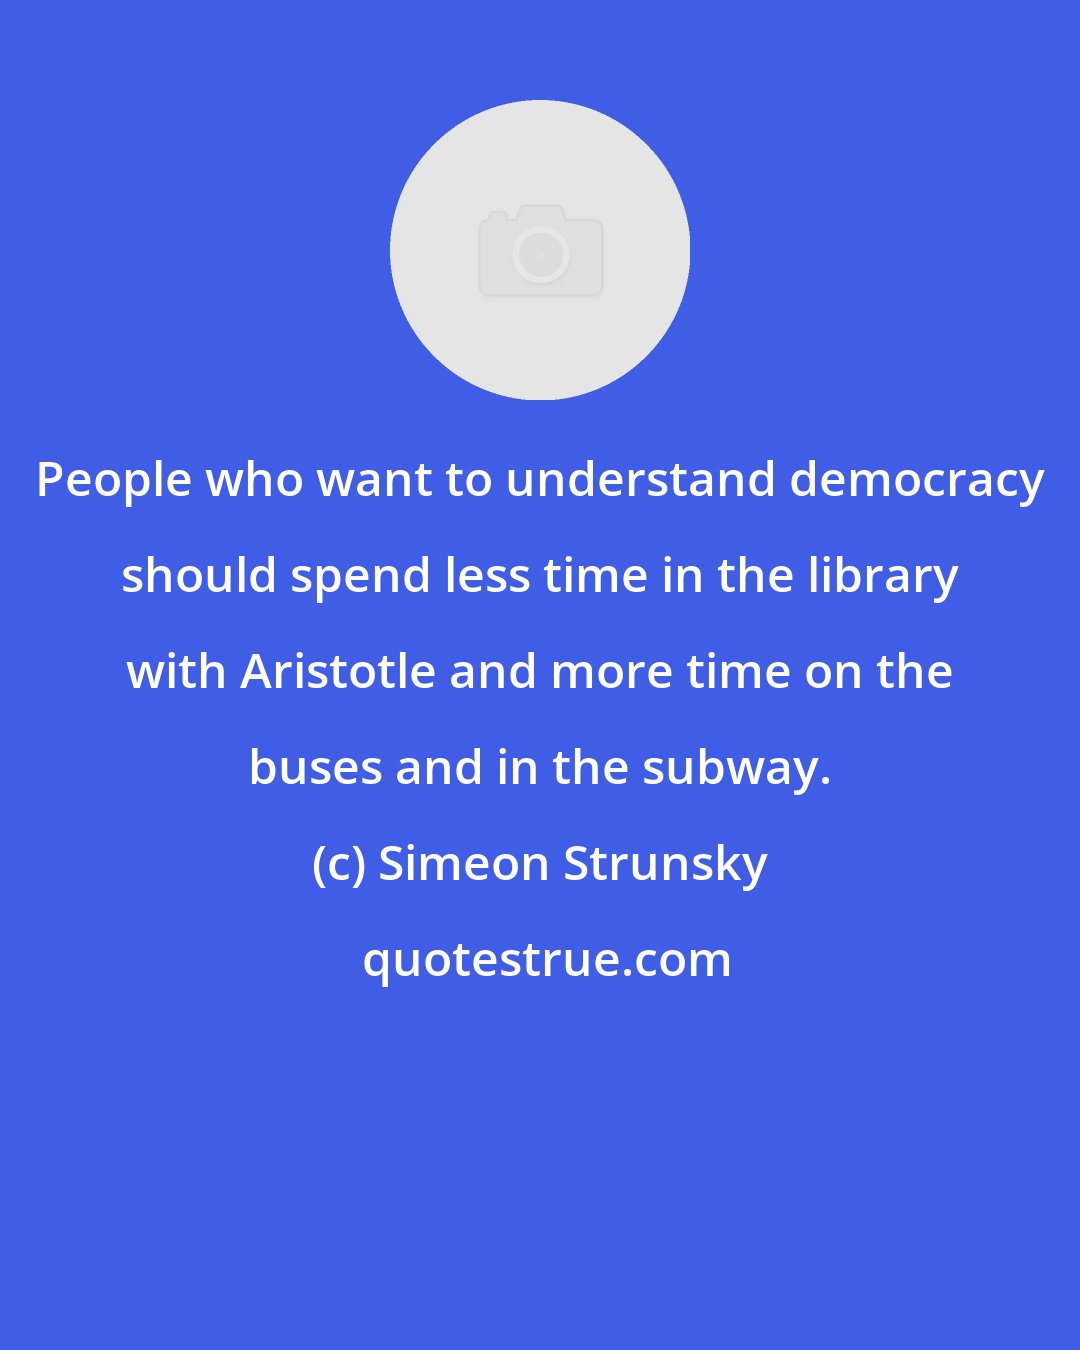 Simeon Strunsky: People who want to understand democracy should spend less time in the library with Aristotle and more time on the buses and in the subway.